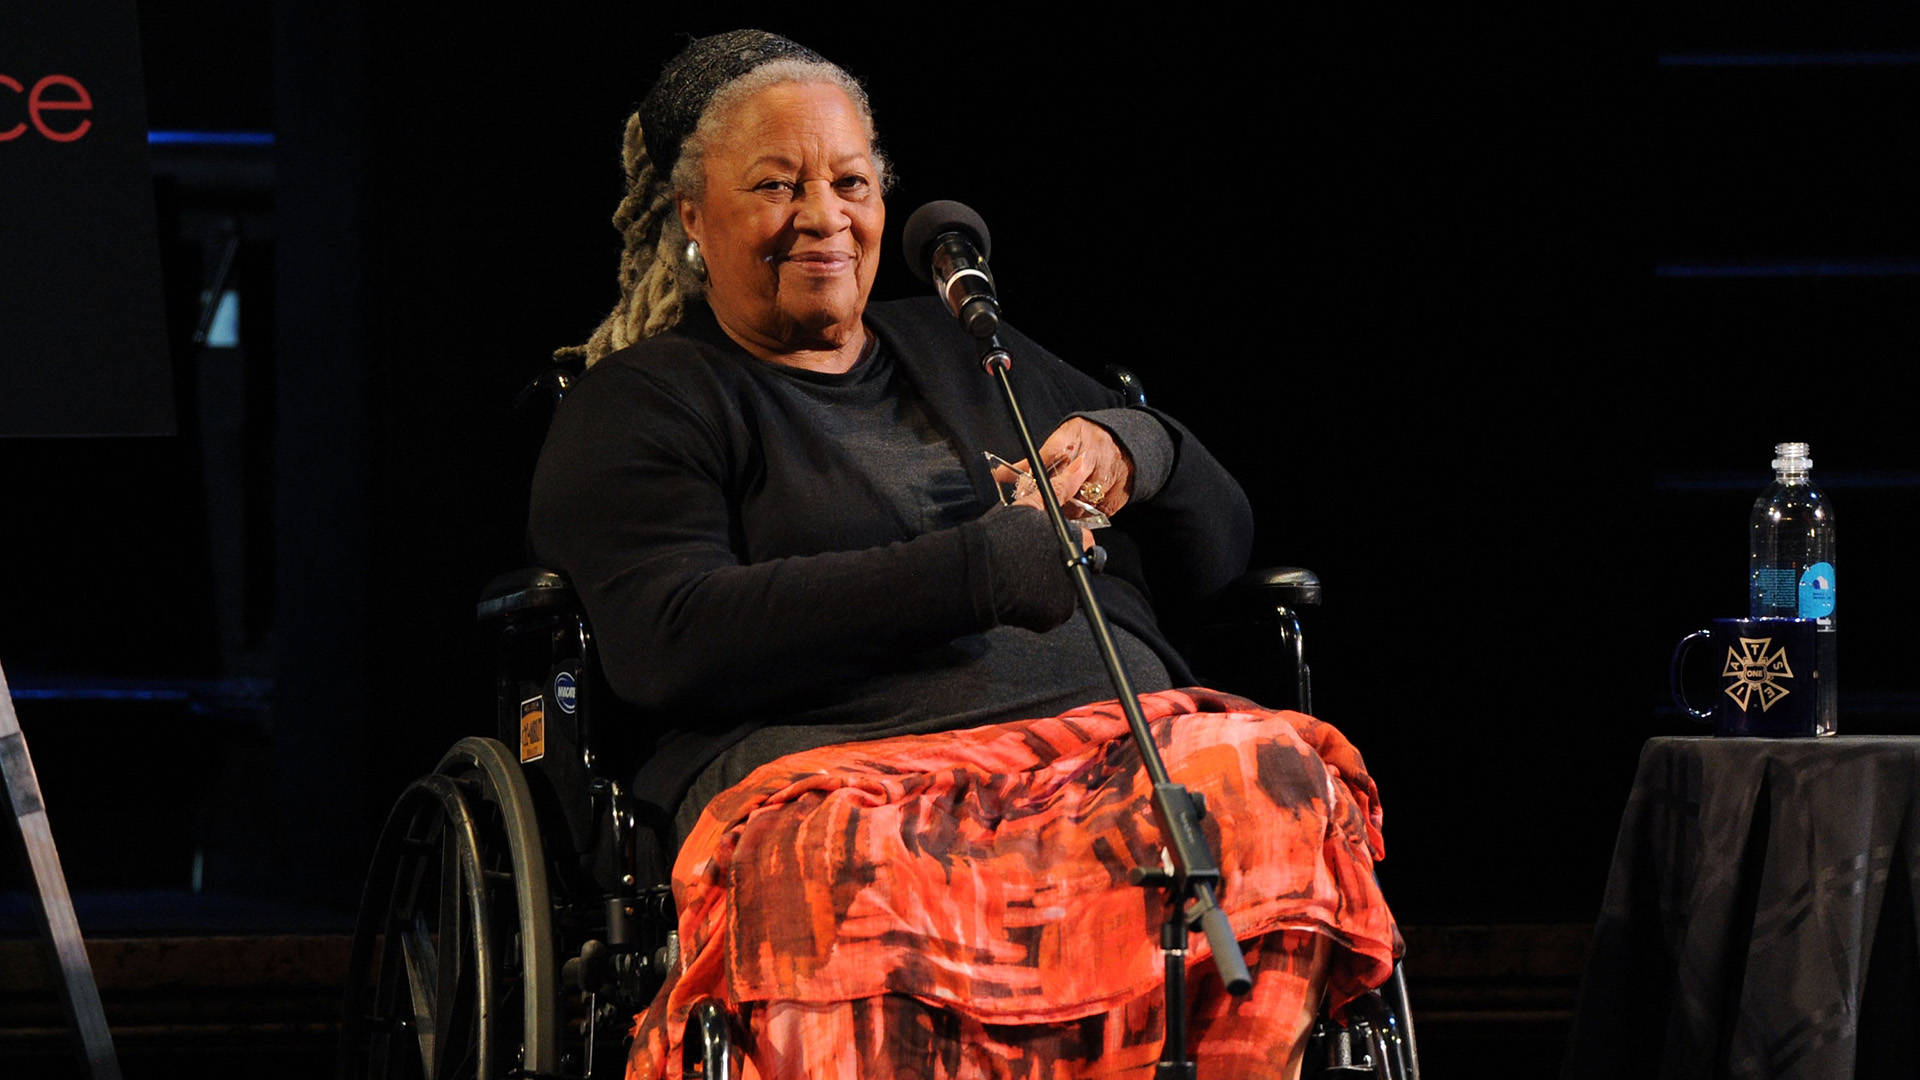 Toni Morrison attends Art &amp; Social Activism, a discussion on Broadway with Ta-Nehisi Coates, Toni Morrison and Sonia Sanchez on June 15, 2016 in New York City.  Craig Barritt/Getty Images for The Stella Adler Studio of Acting